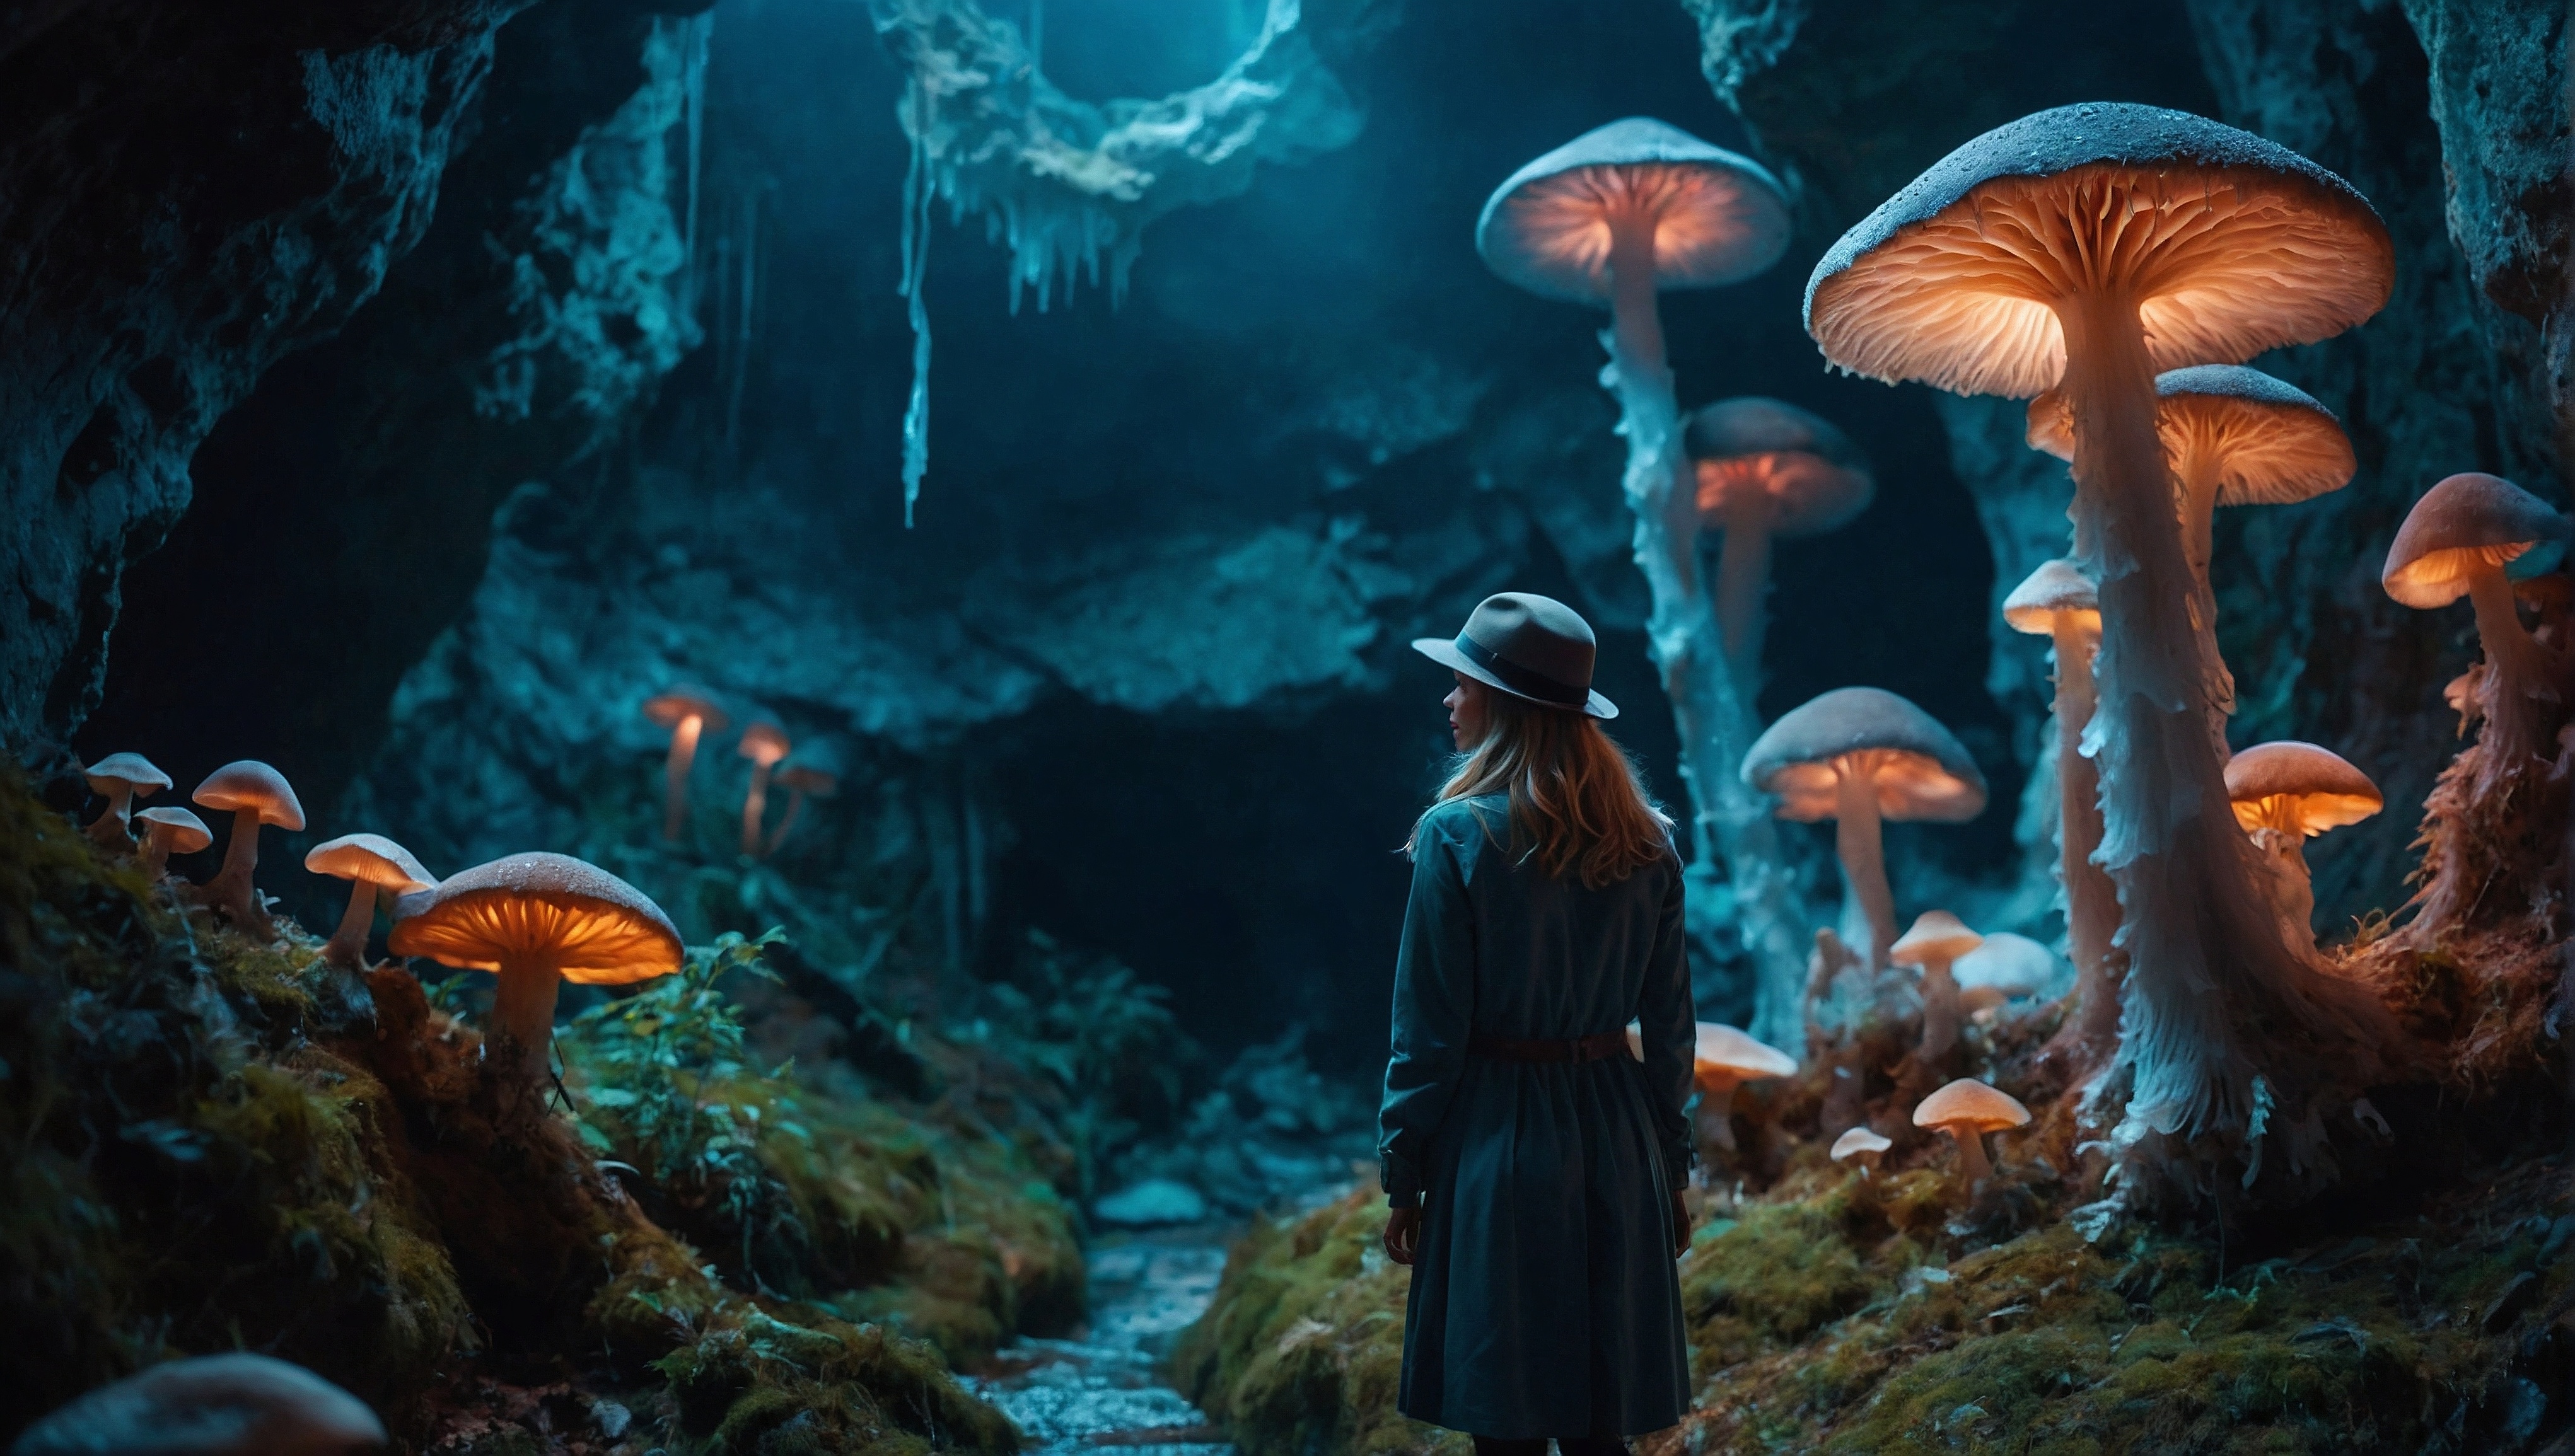 A man stands near mushrooms in the woods